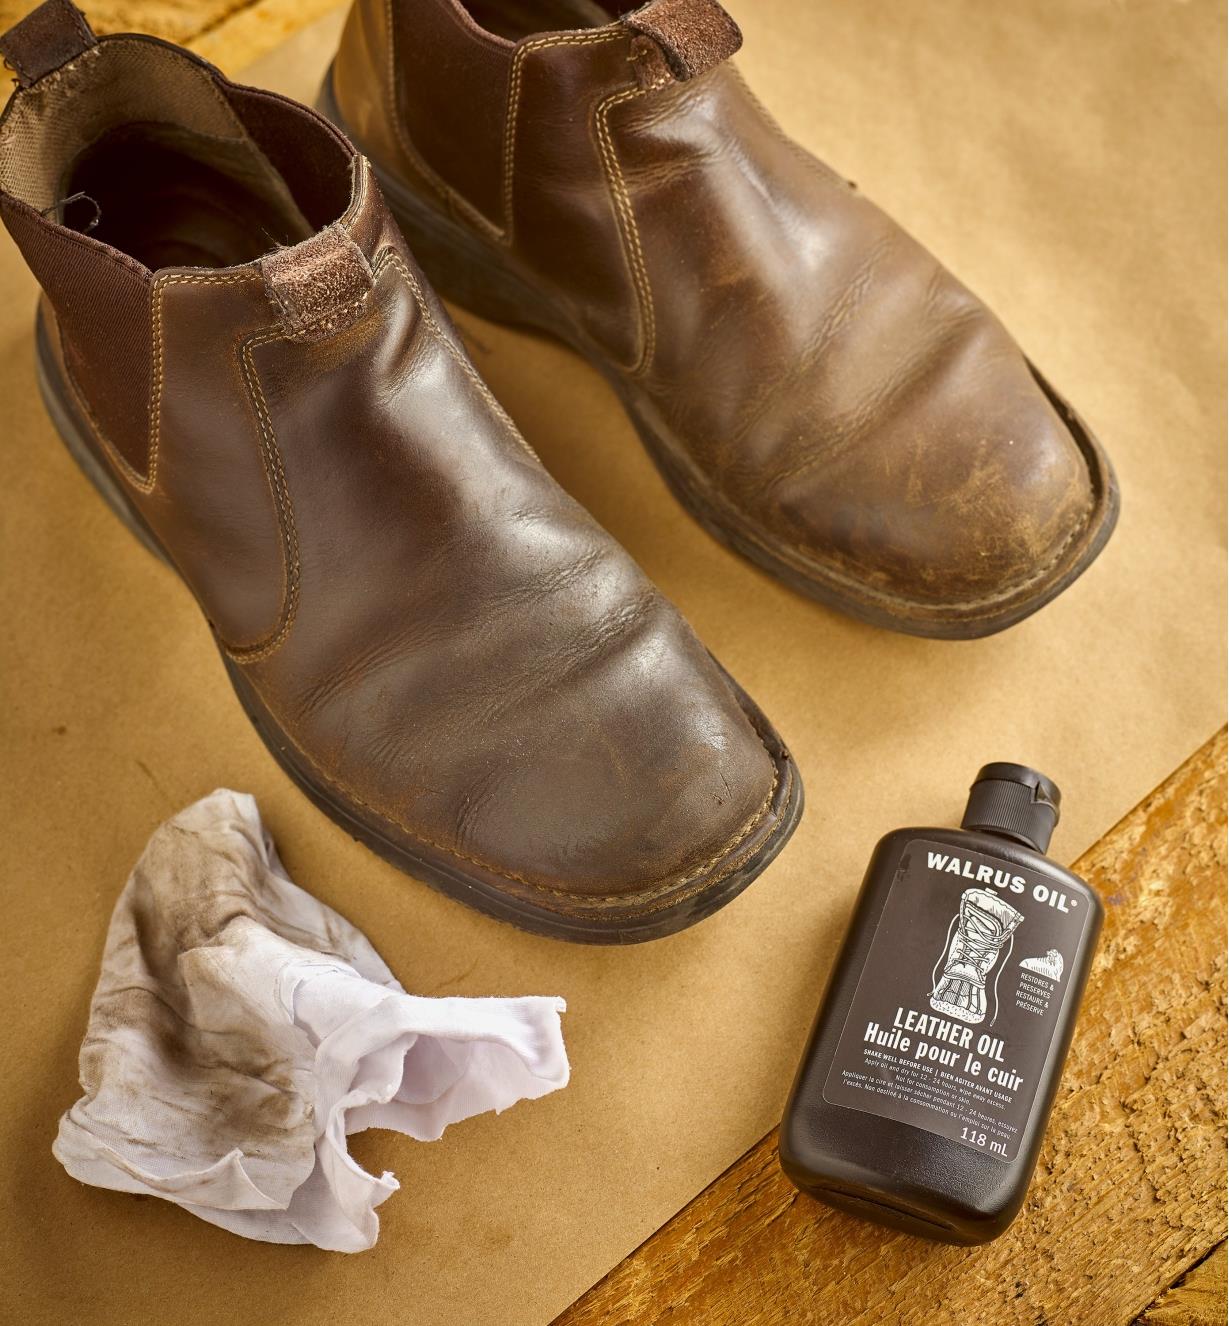 A pair of leather boots showing one boot conditioned with Walrus Oil leather oil